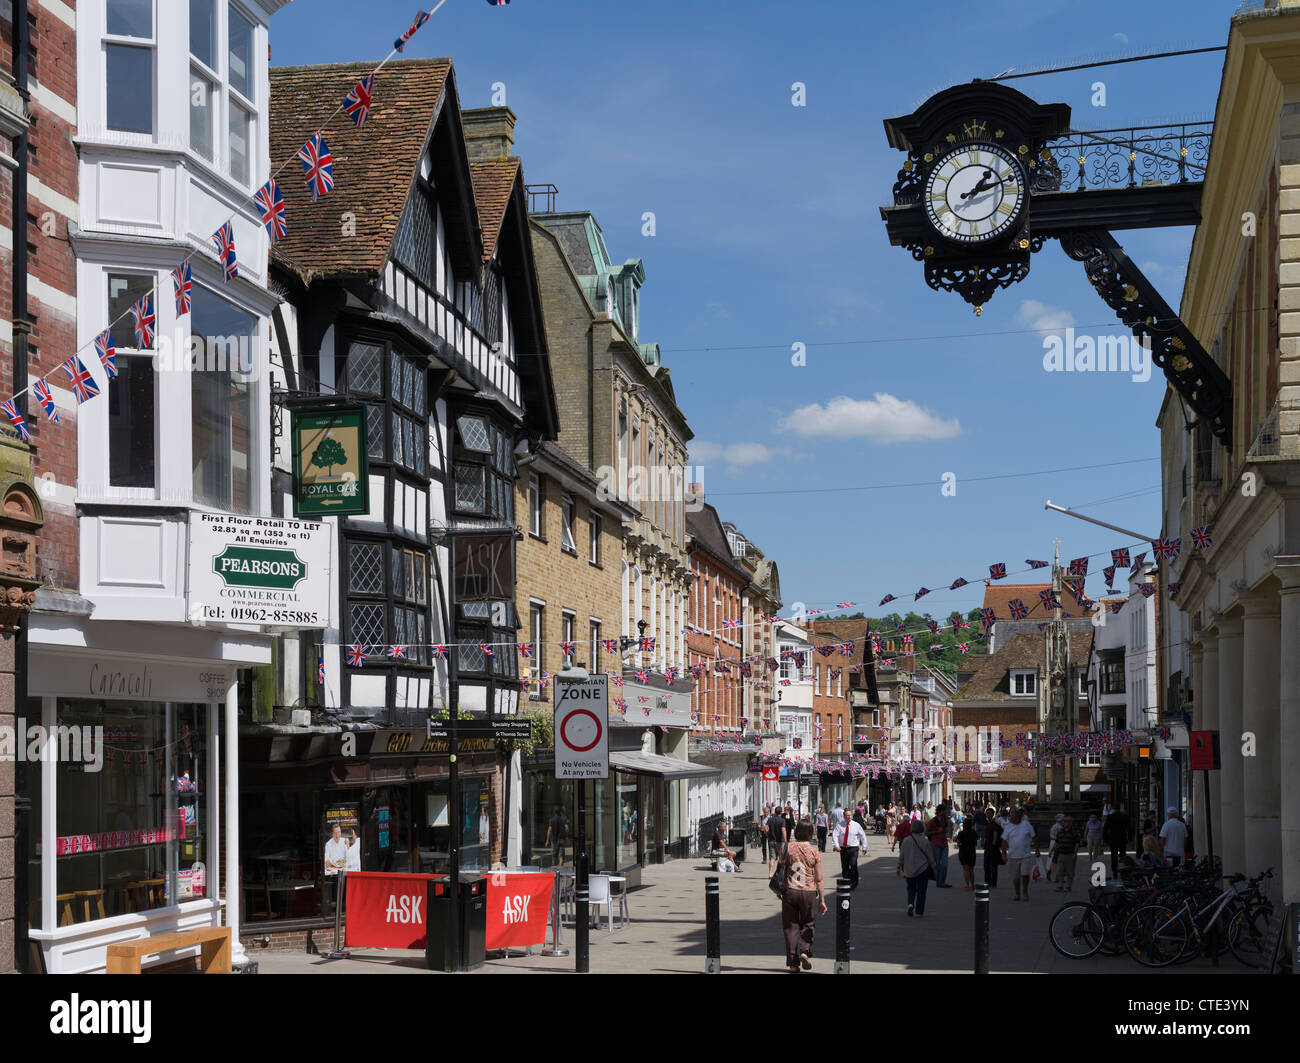 dh High street WINCHESTER HAMPSHIRE People in Winchester High Street clock pedestrianised city streets england uk town britain Stock Photo